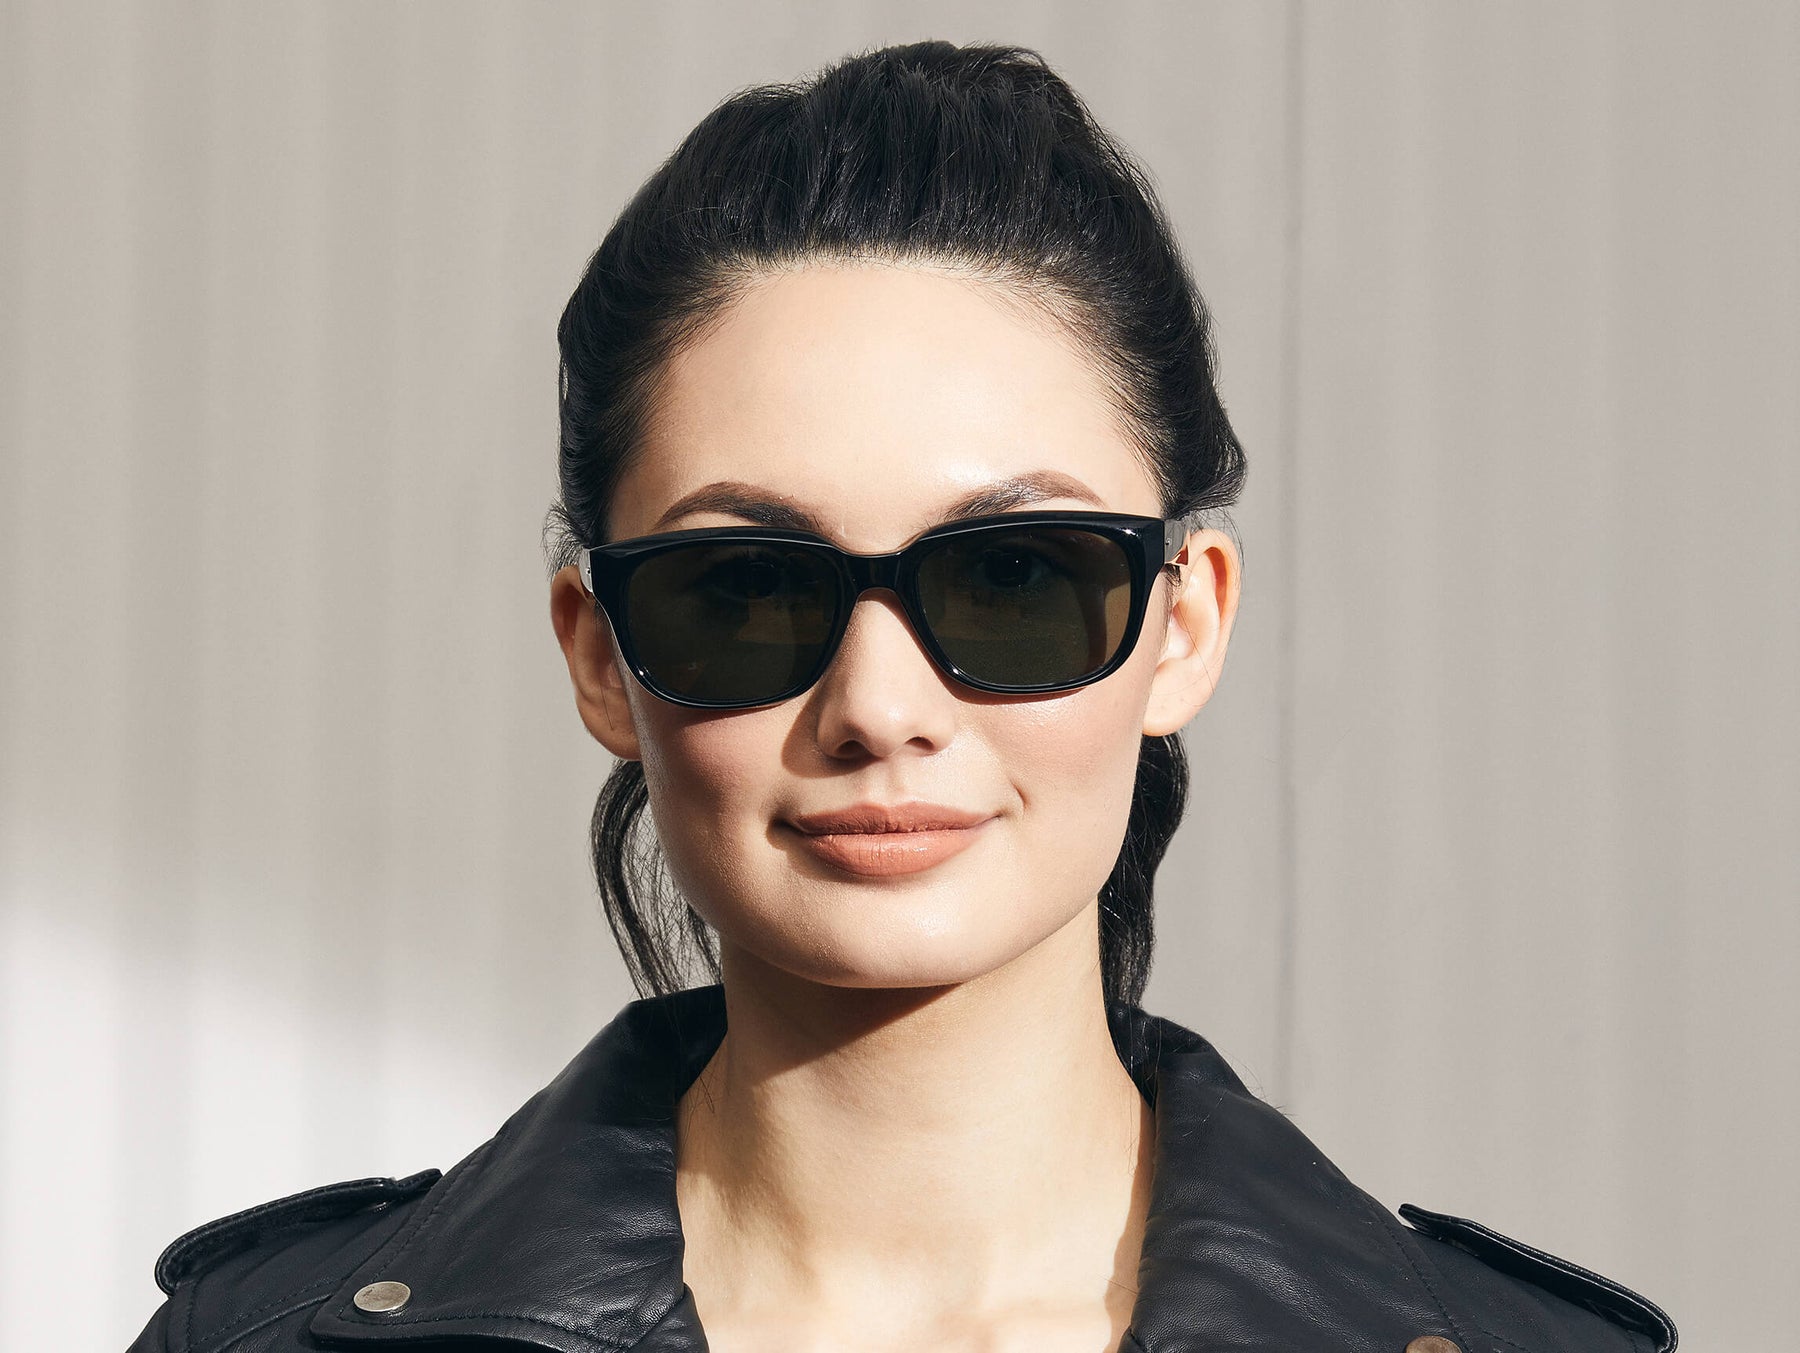 Model is wearing The ZINDIK SUN in Black in size 54 with G-15 Glass Lenses